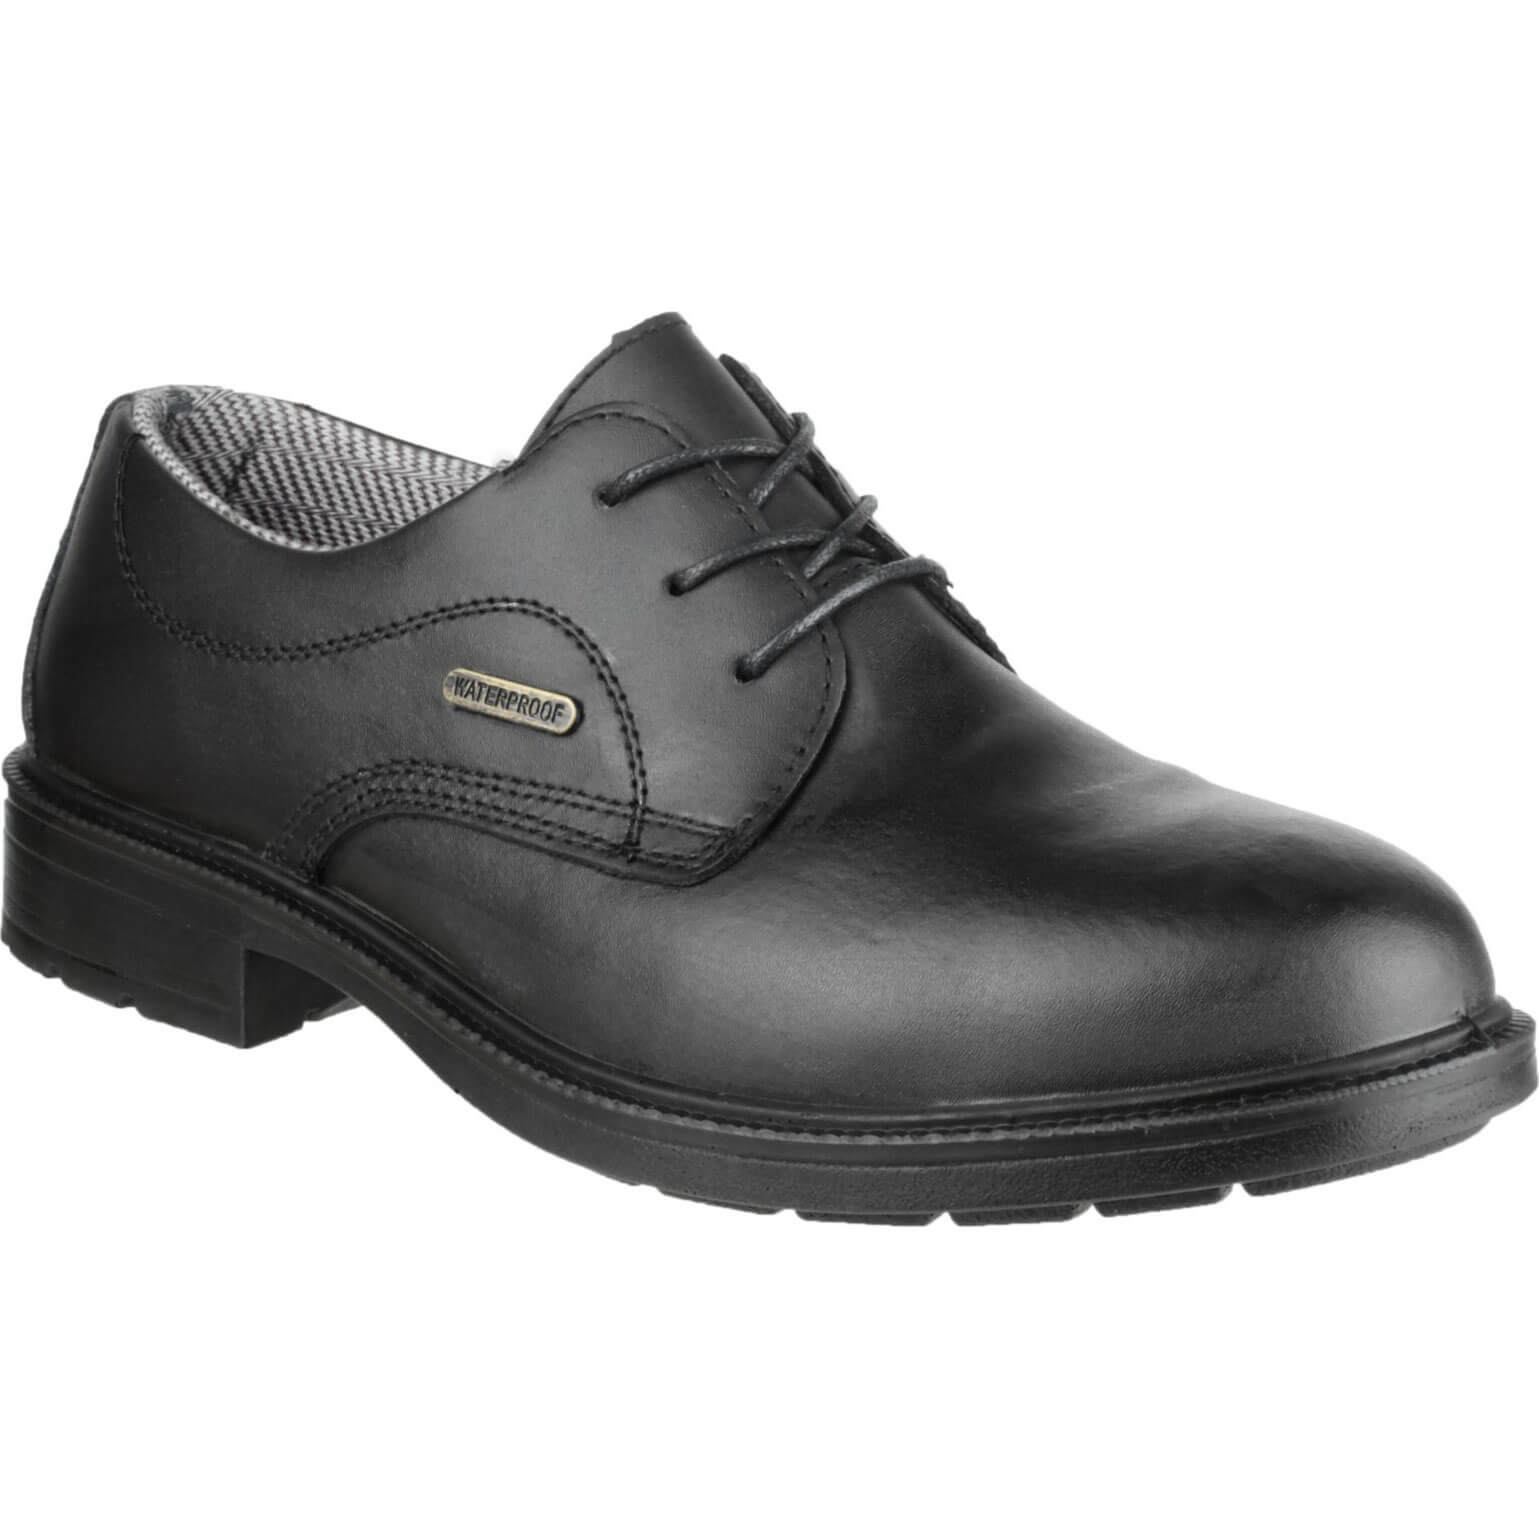 Image of Amblers Safety FS62 Waterproof Lace Up Gibson Safety Shoe Black Size 6